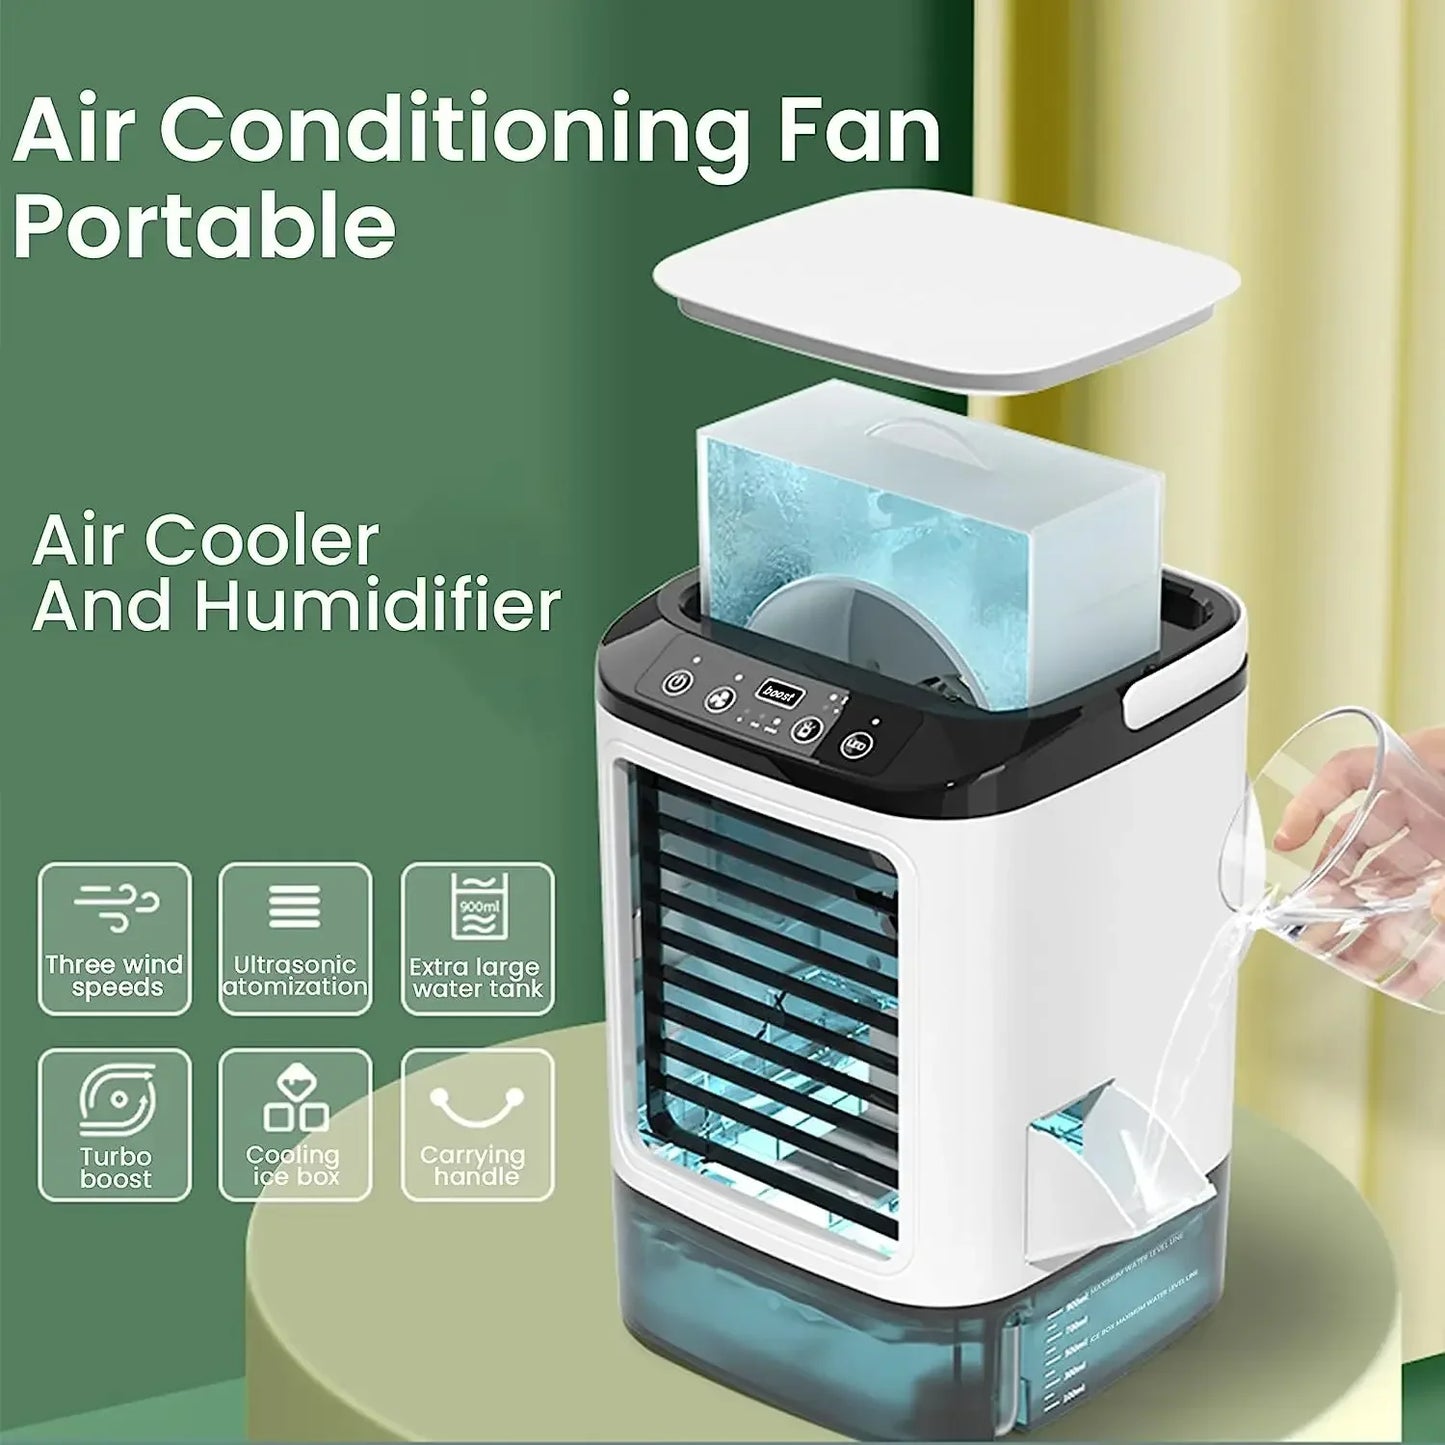 Air Conditioner Portable Fan Desktop Dual Spray Ultrasonic Atomization 3-Speed Mute Air Cooler Night Light Electric Fan for Home

Air Conditioner Portable Fan
Night Light Electric Fan
3-Speed Mute Air Cooler